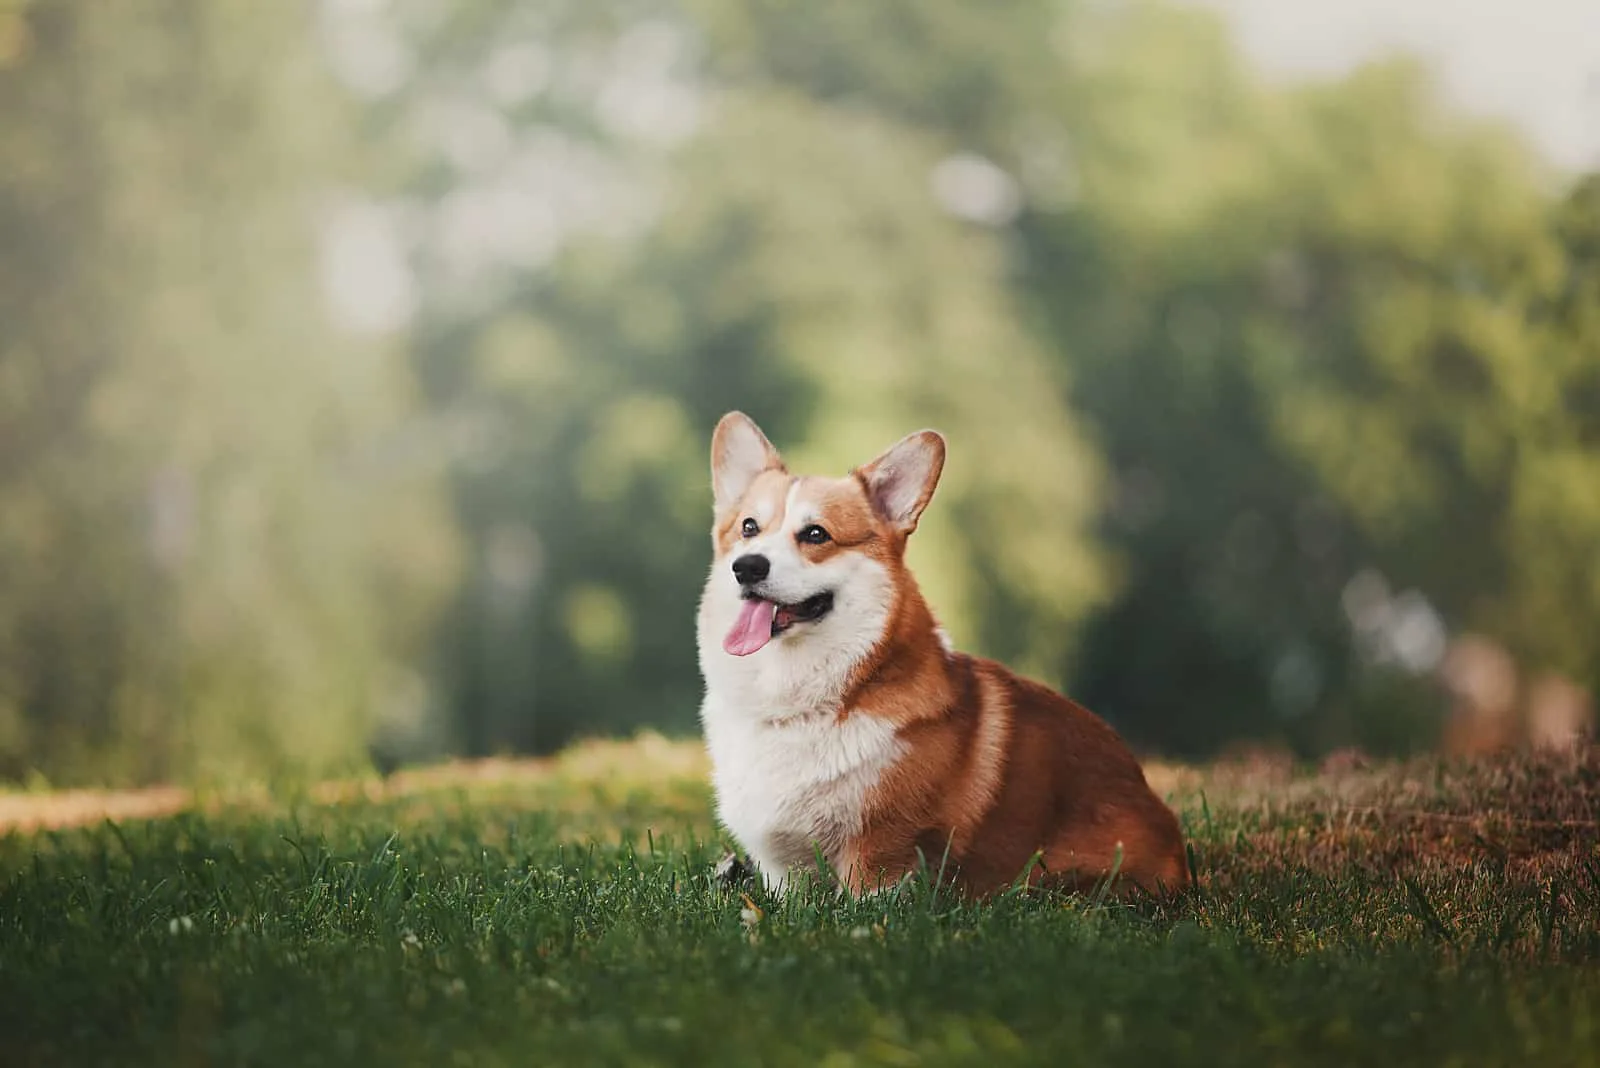 the corgi sits on the grass and laughs